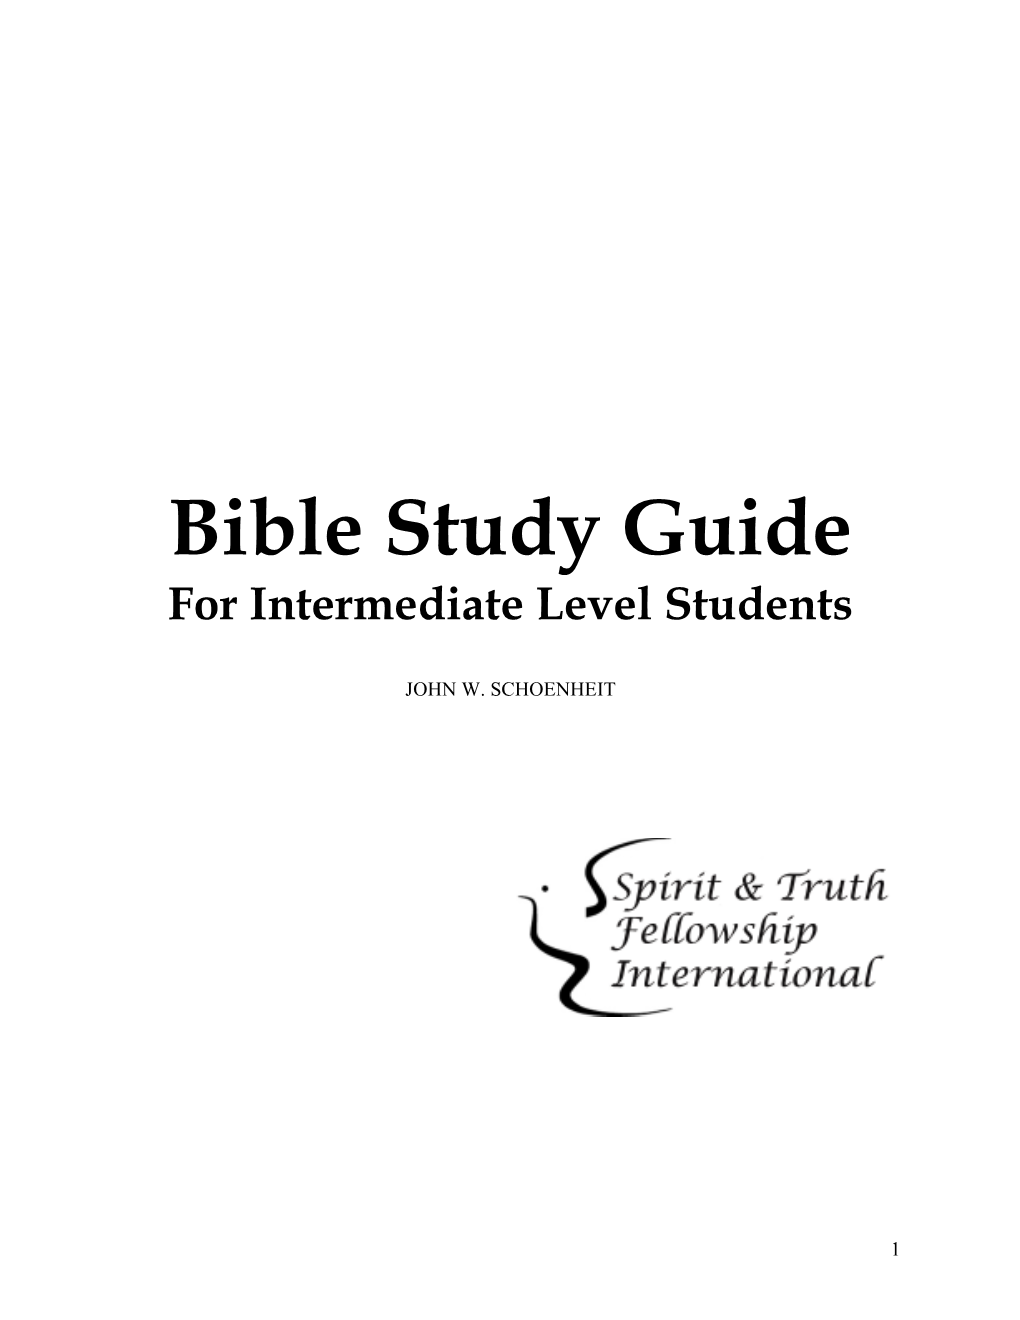 Bible Study Guide for Intermediate Level Students